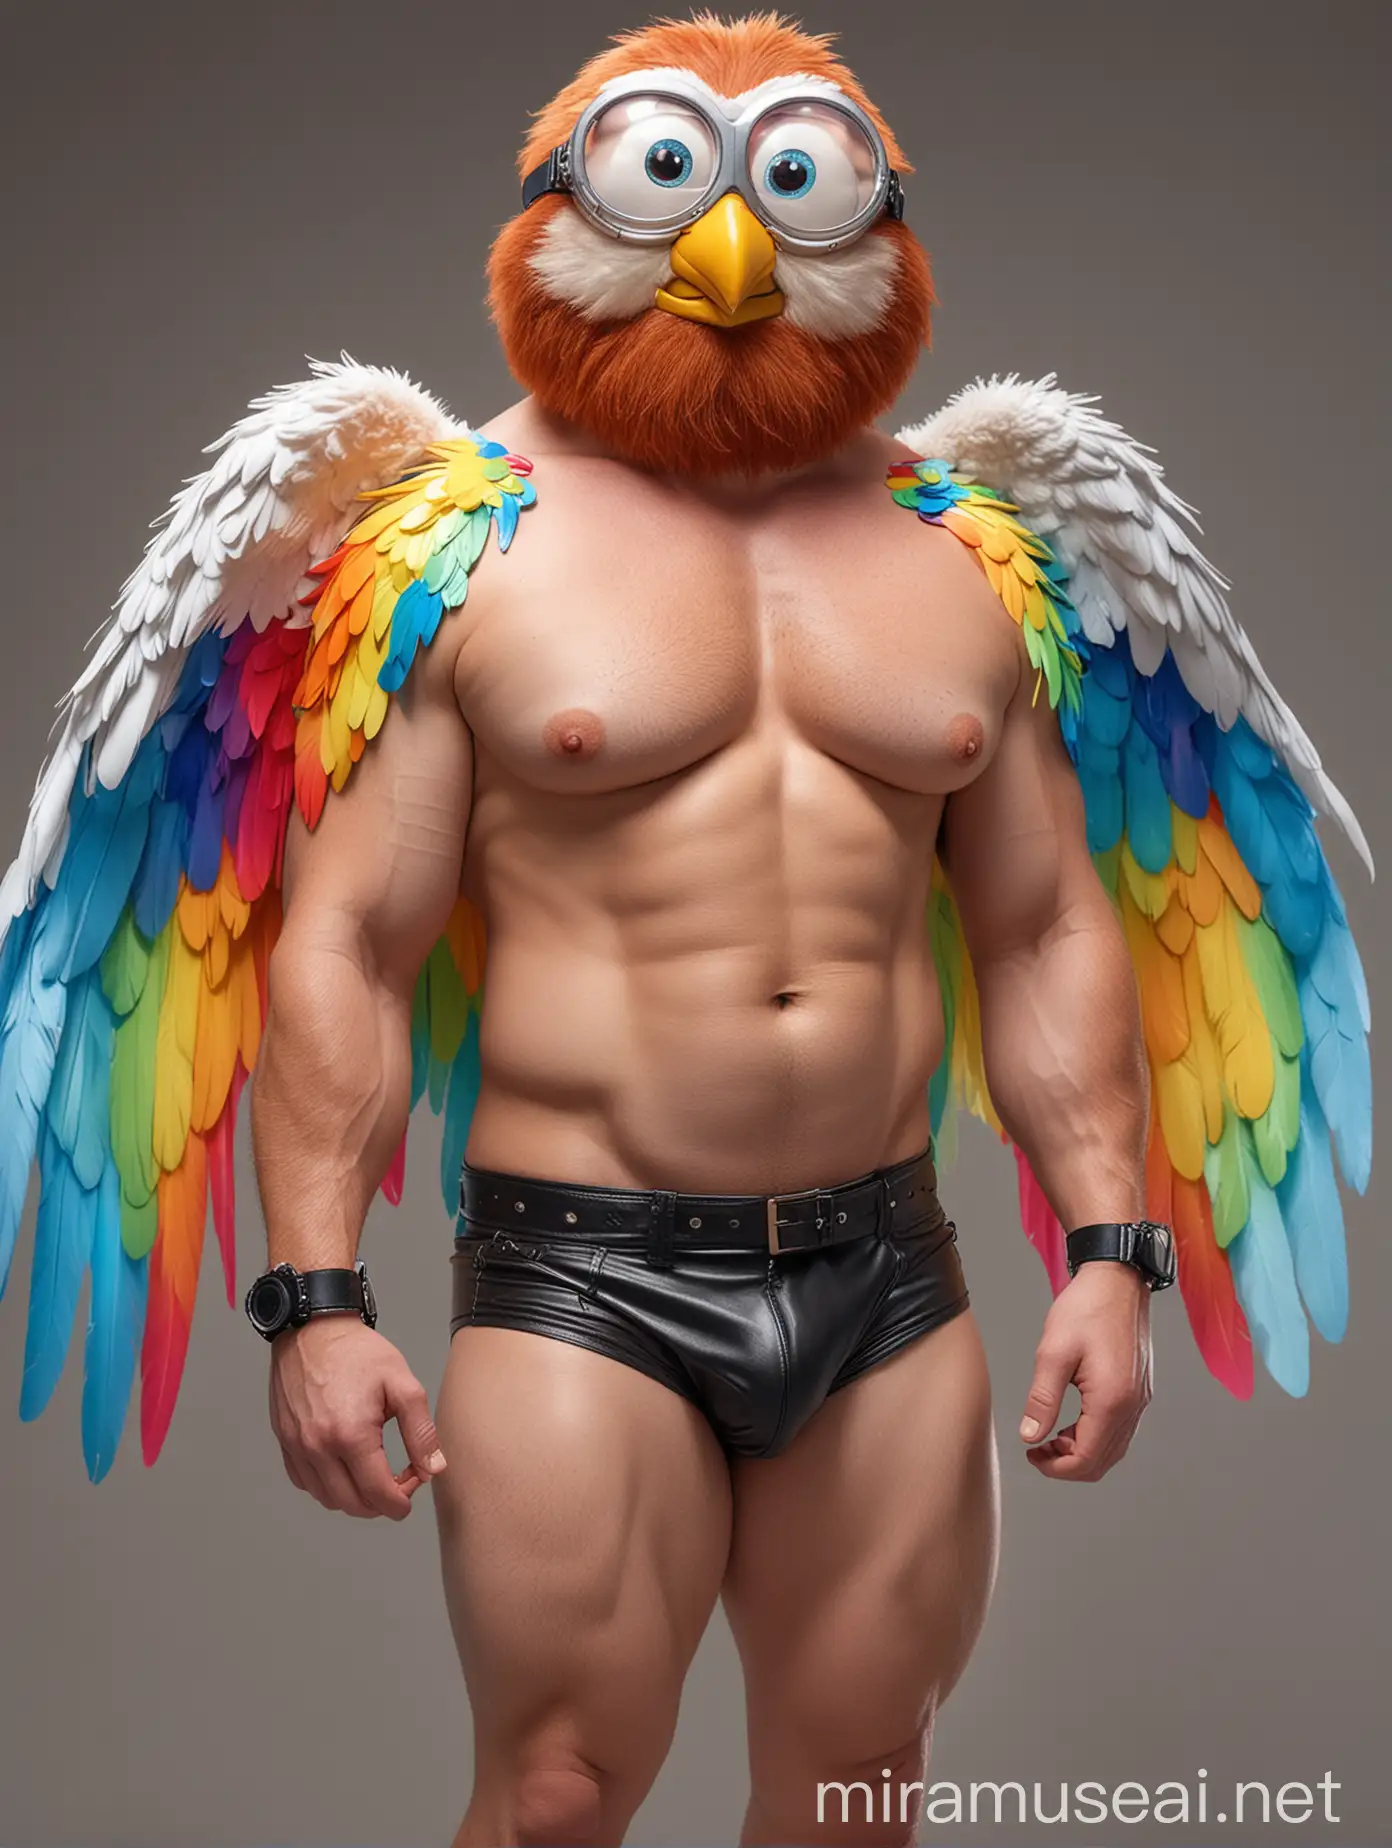 Bodybuilder with Rainbow Wings Flexes in Colorful Outfit